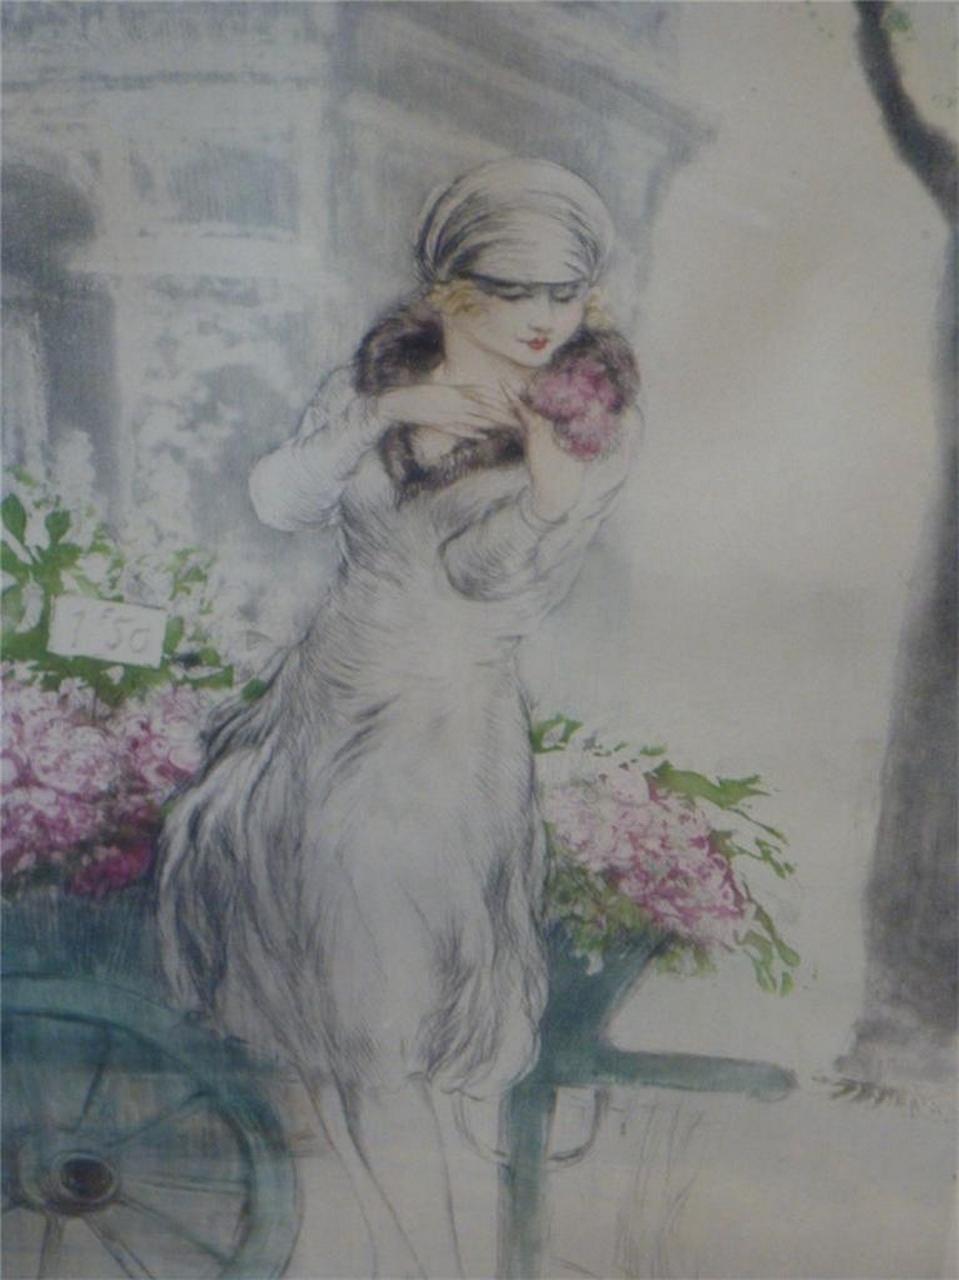 The Following Item we are Offering is A Very Beautiful and Very RARE Original Framed etching and aquatint with handcoloring by Louis Icart (1888-1950). Painting showcases A Beautiful Dressed Woman Shopping in Marche Aux Fleurs in Paris by Arc De